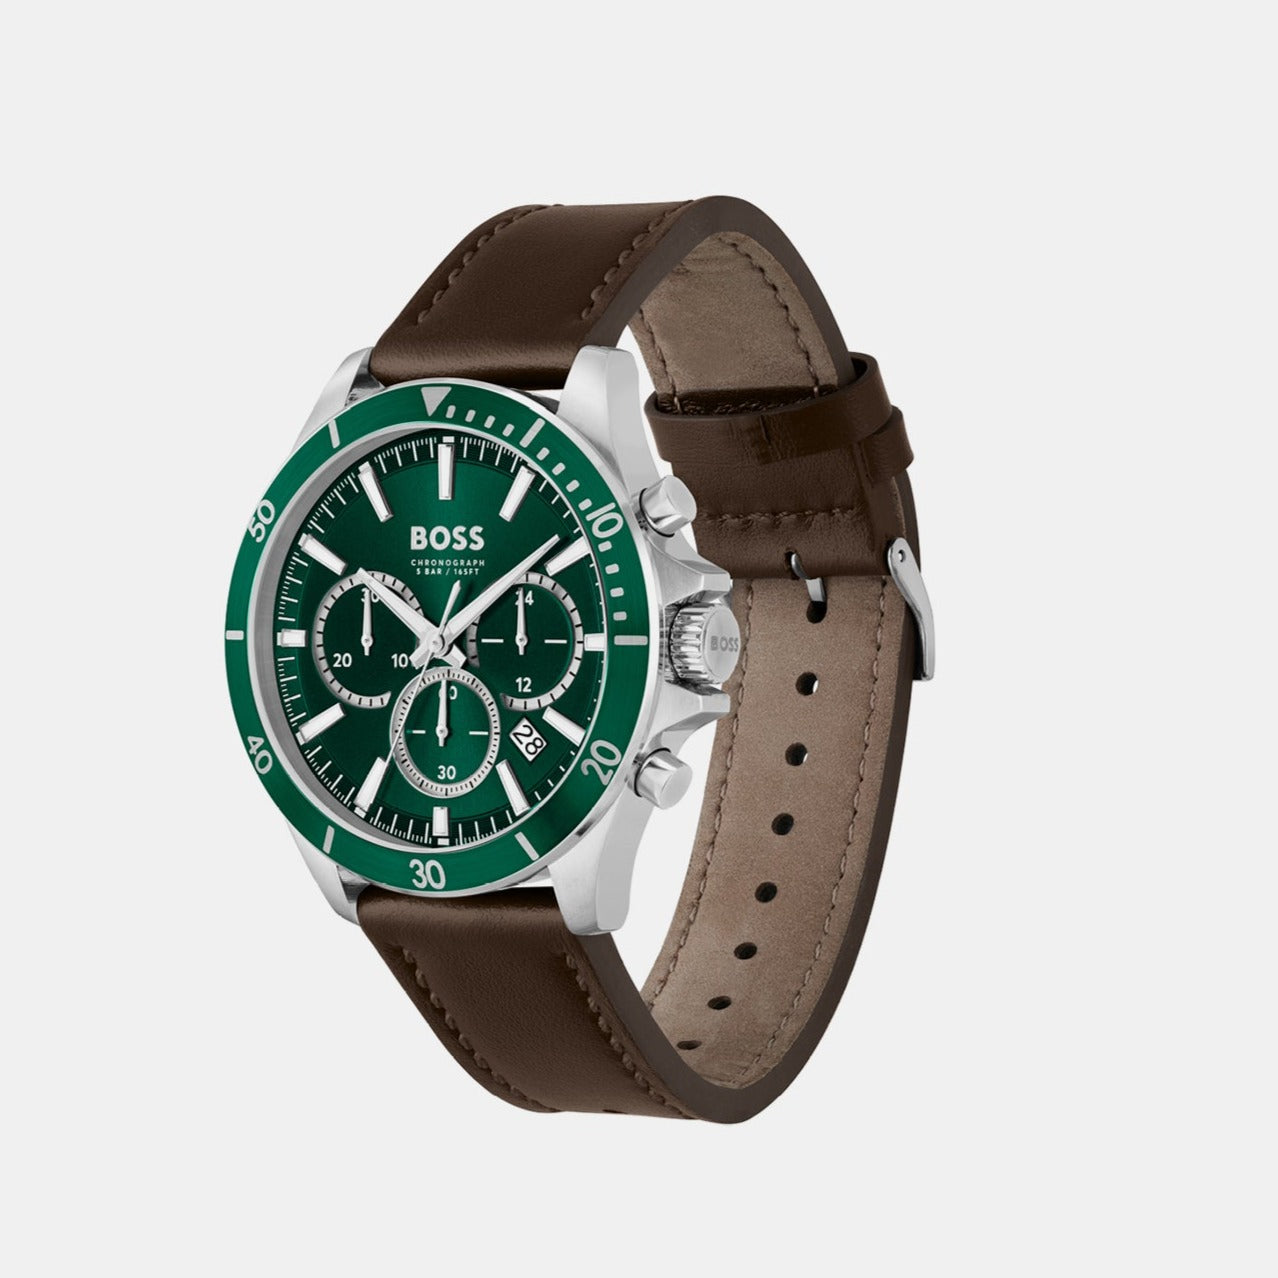 Male Troper – 1514098 Chronograph Time Just In Green Watch Leather